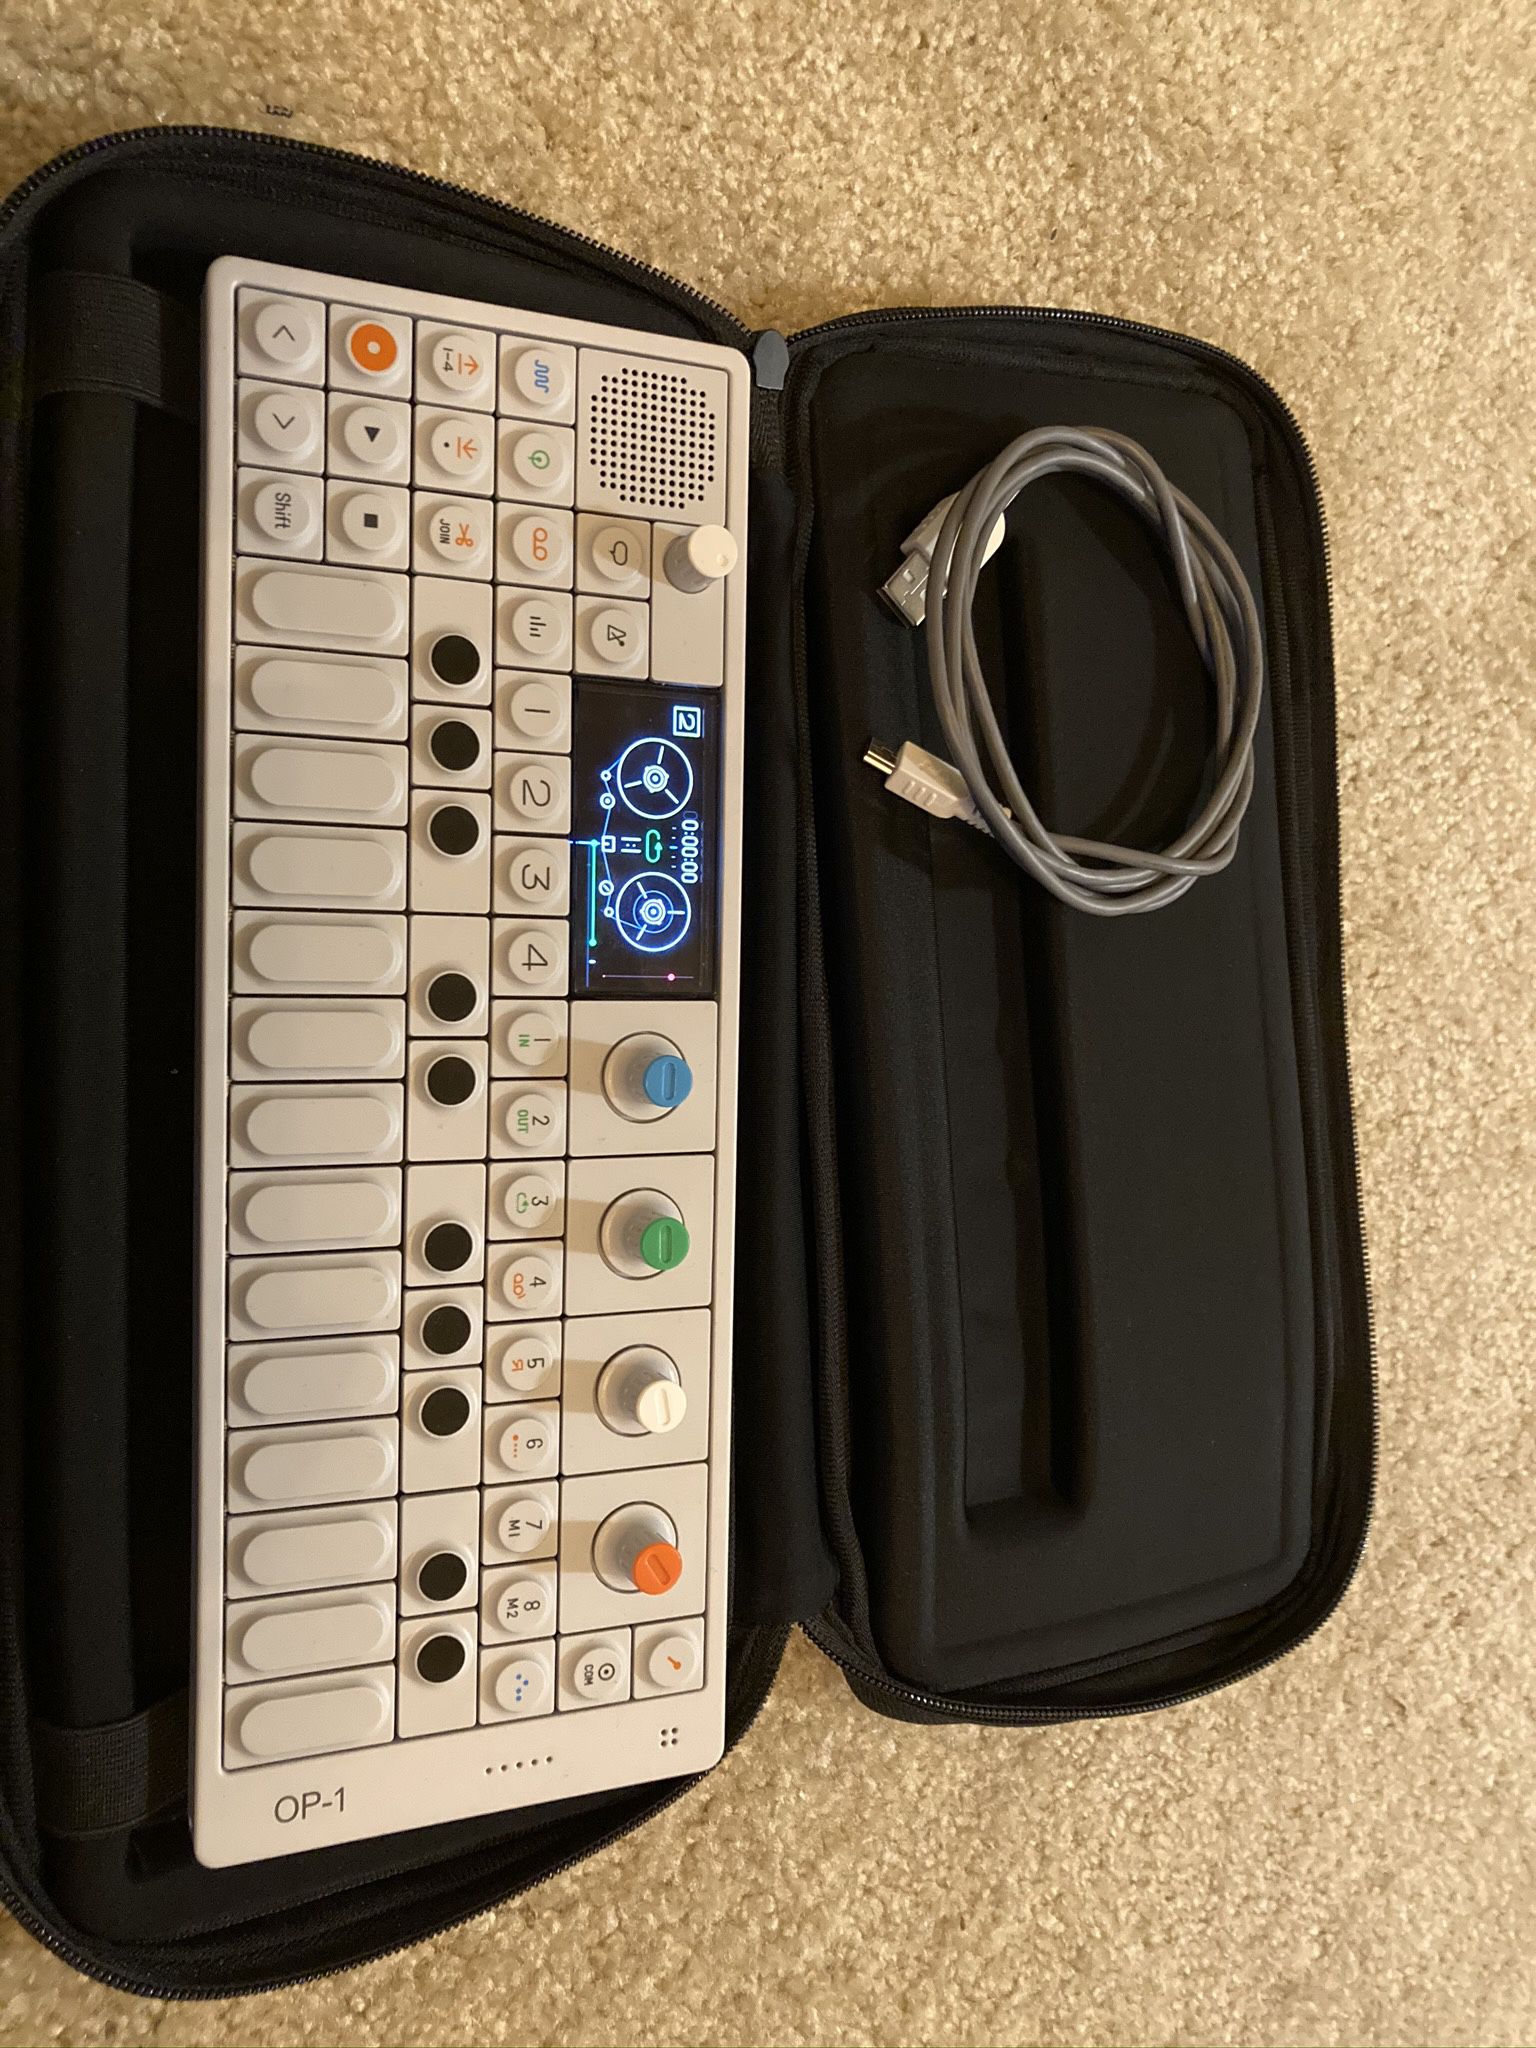 Op-1 Barely used